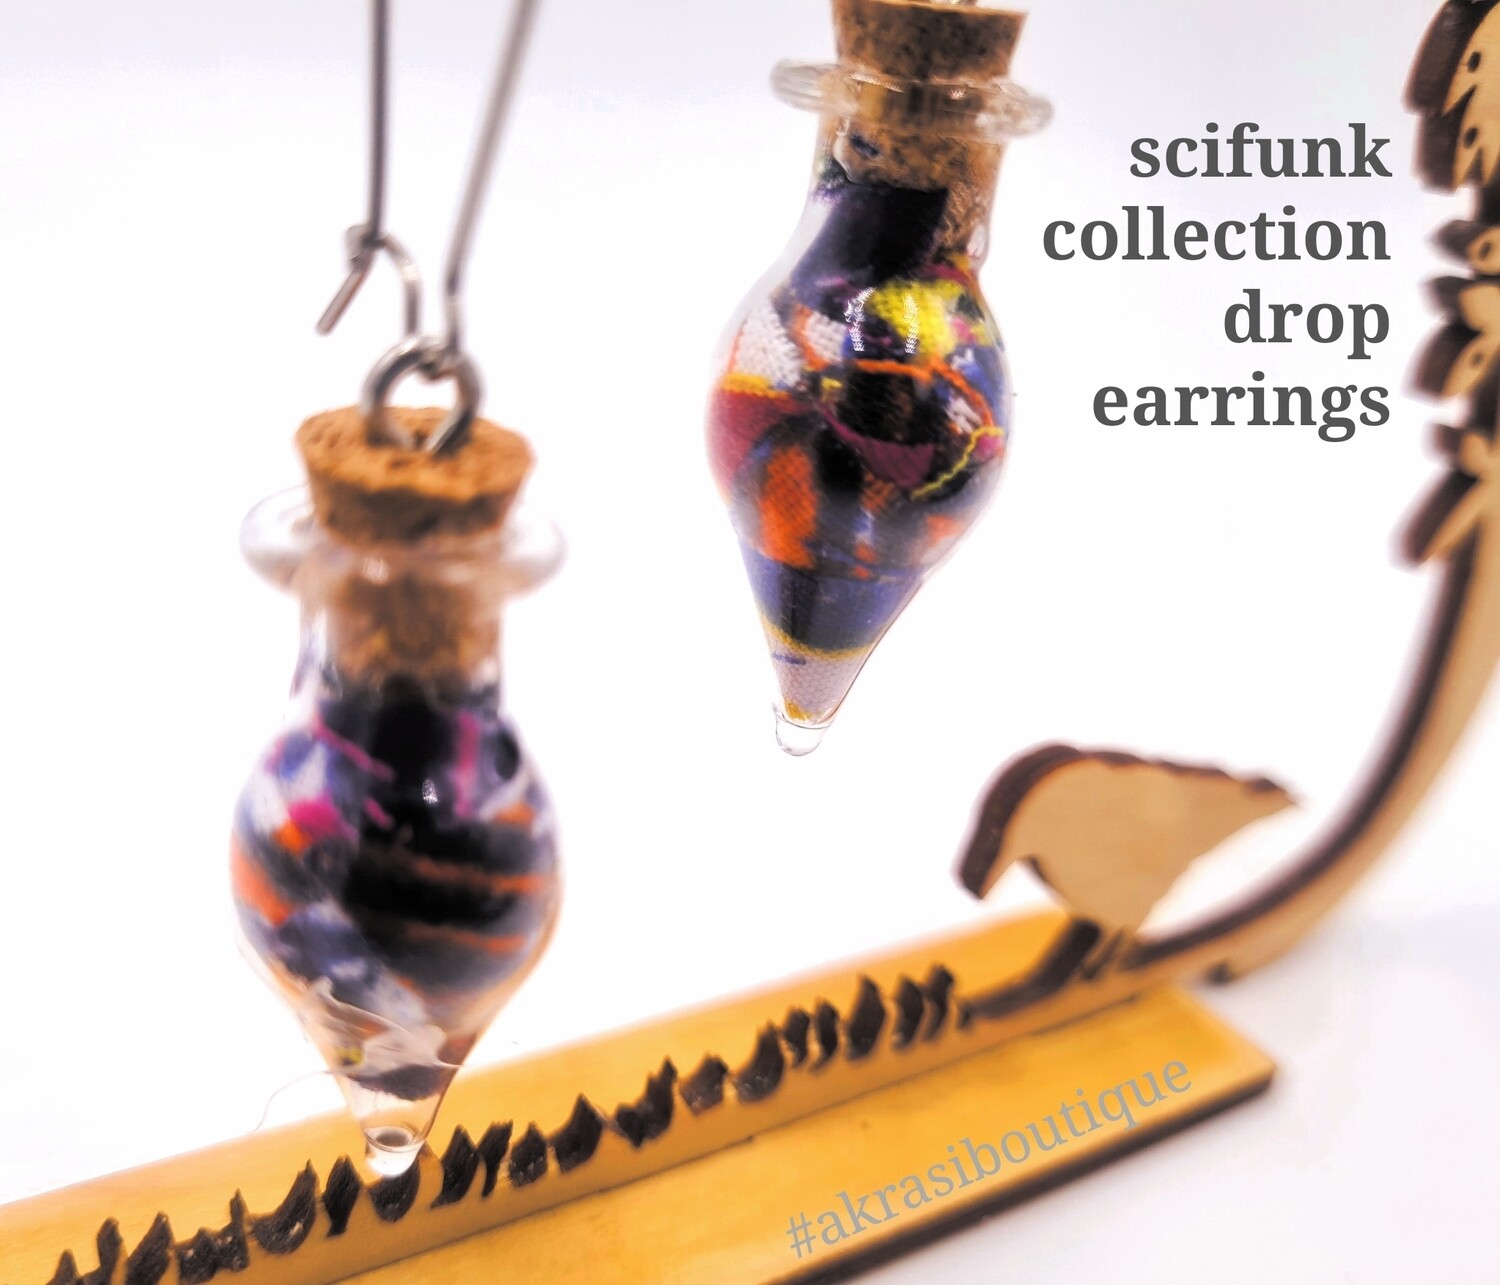 Ankara alchemy mashup scifunk collection drop earrings sealed in glass